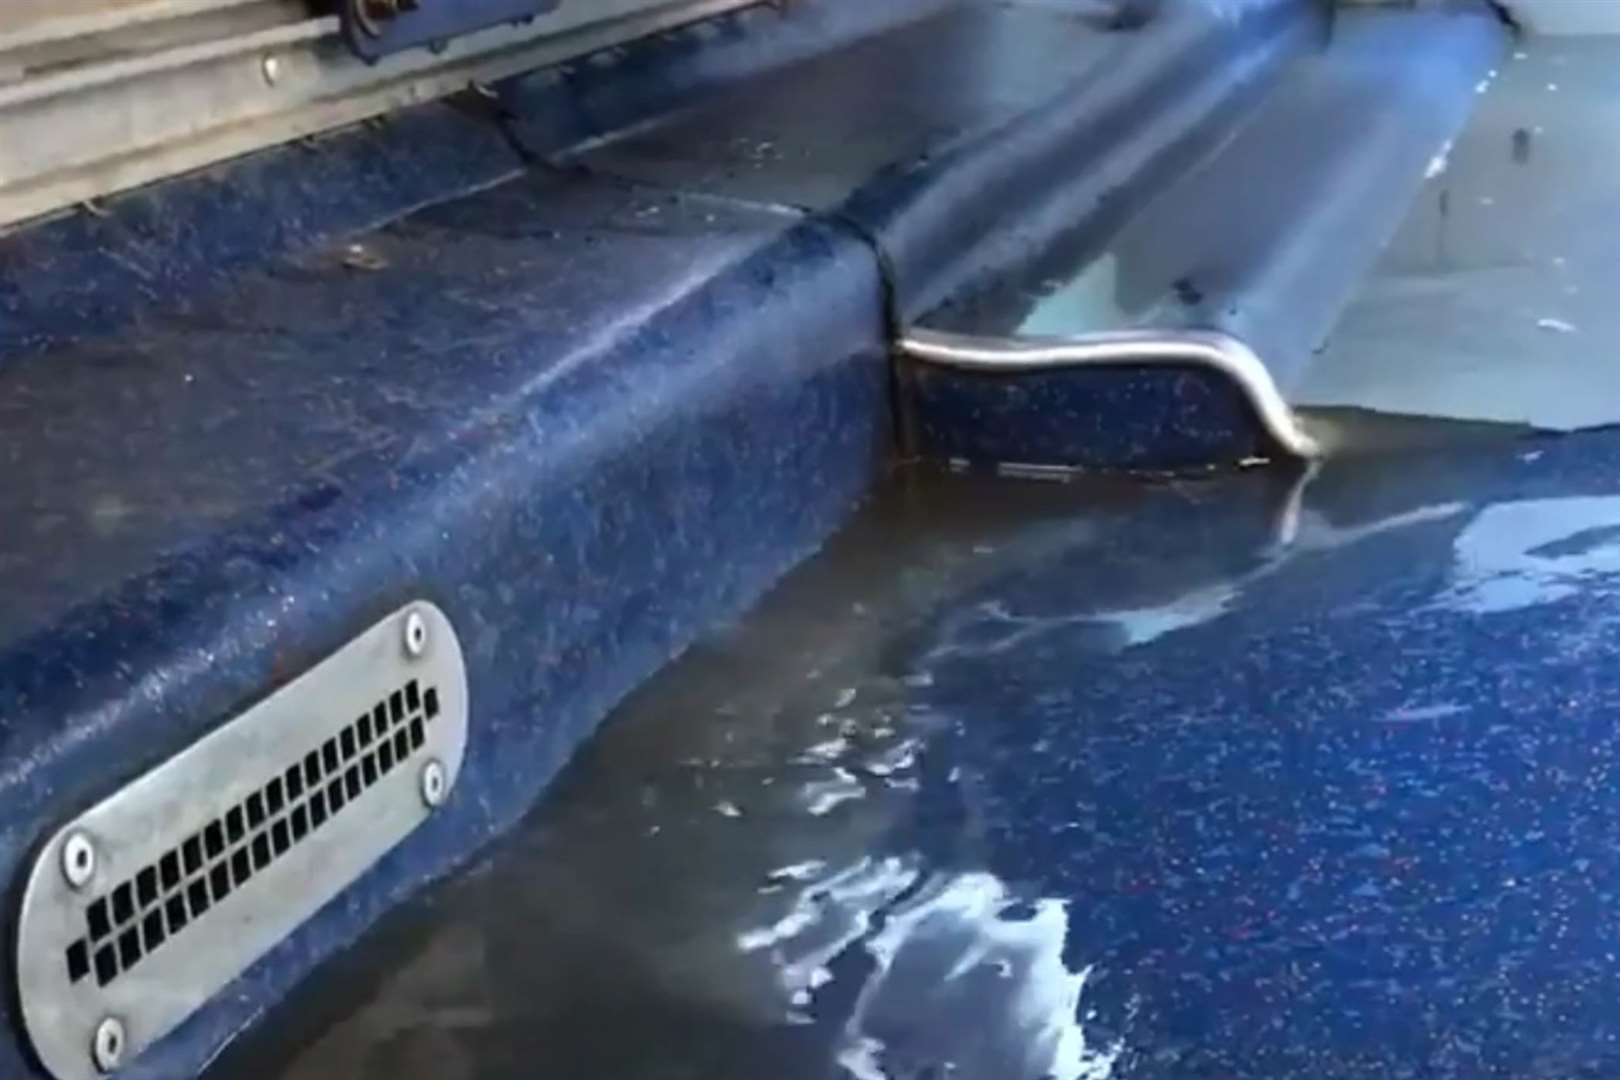 The bus user captured on video dirty water rushing under her feet